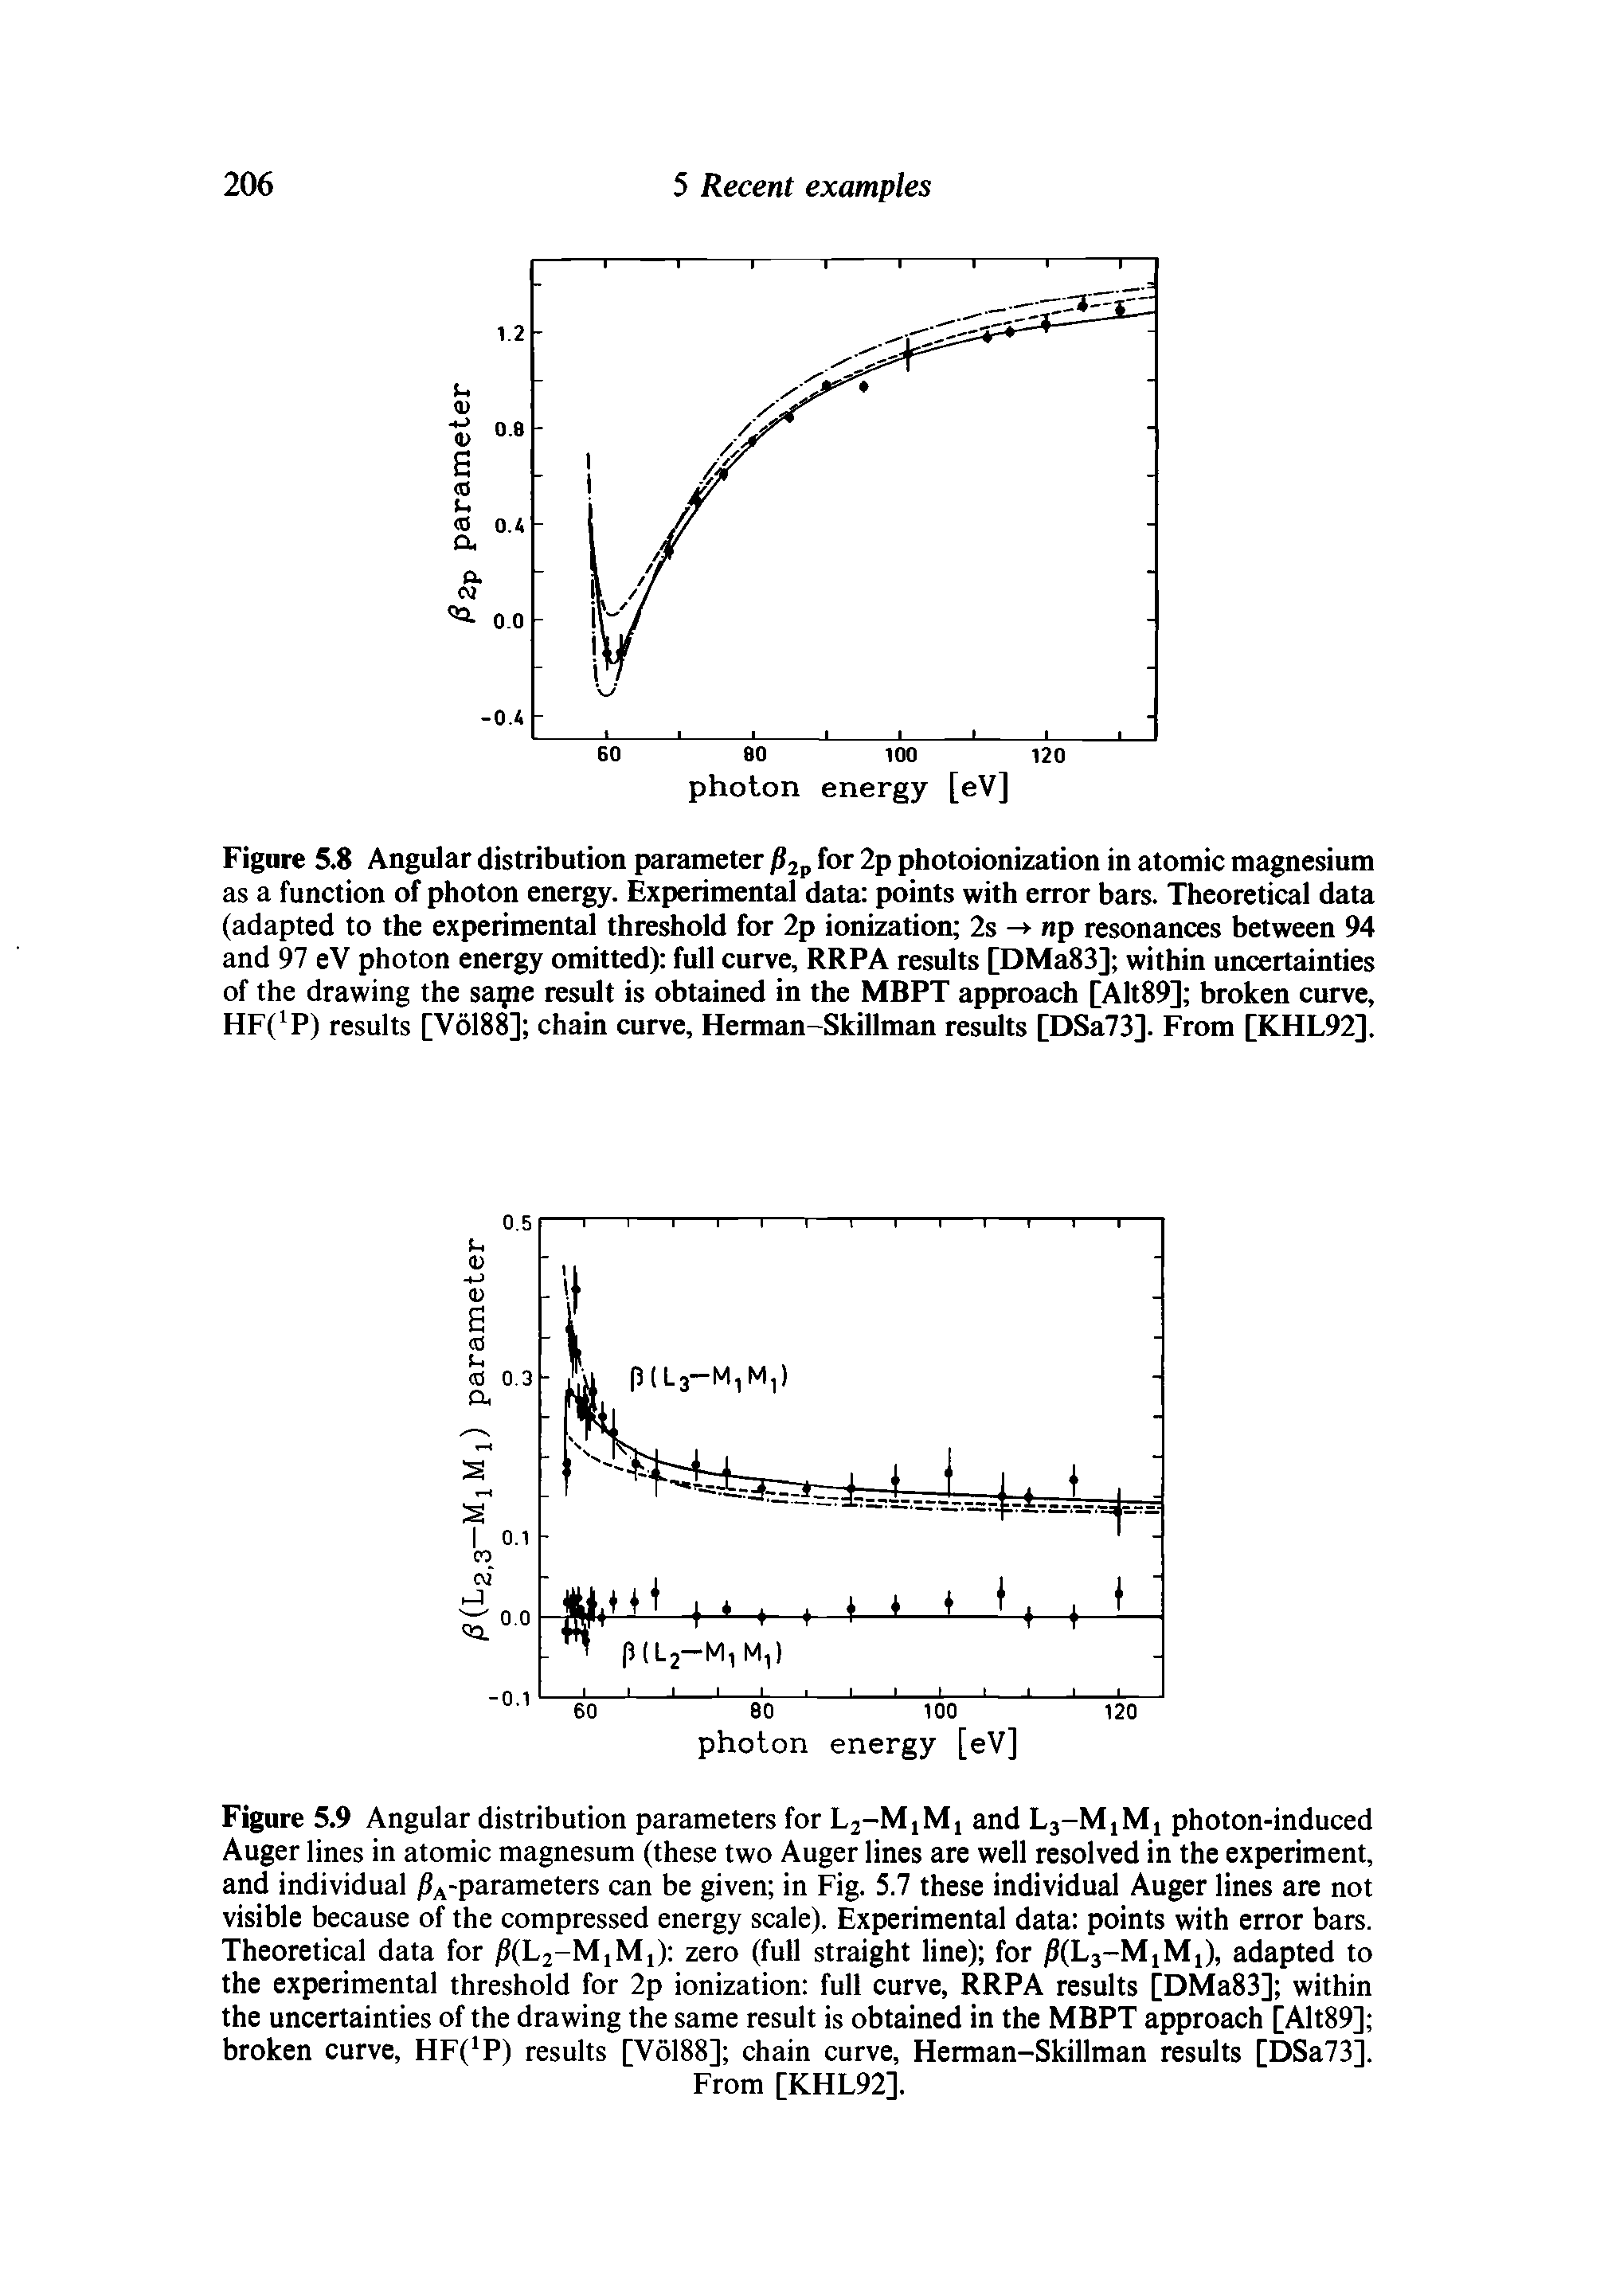 Figure 5.8 Angular distribution parameter / 2p for 2p photoionization in atomic magnesium as a function of photon energy. Experimental data points with error bars. Theoretical data (adapted to the experimental threshold for 2p ionization 2s - np resonances between 94 and 97 eV photon energy omitted) full curve, RRPA results [DMa83] within uncertainties of the drawing the saipe result is obtained in the MBPT approach [Alt89] broken curve, HF(1P) results [V6188] chain curve, Herman-Skillman results [DSa73]. From [KHL92],...